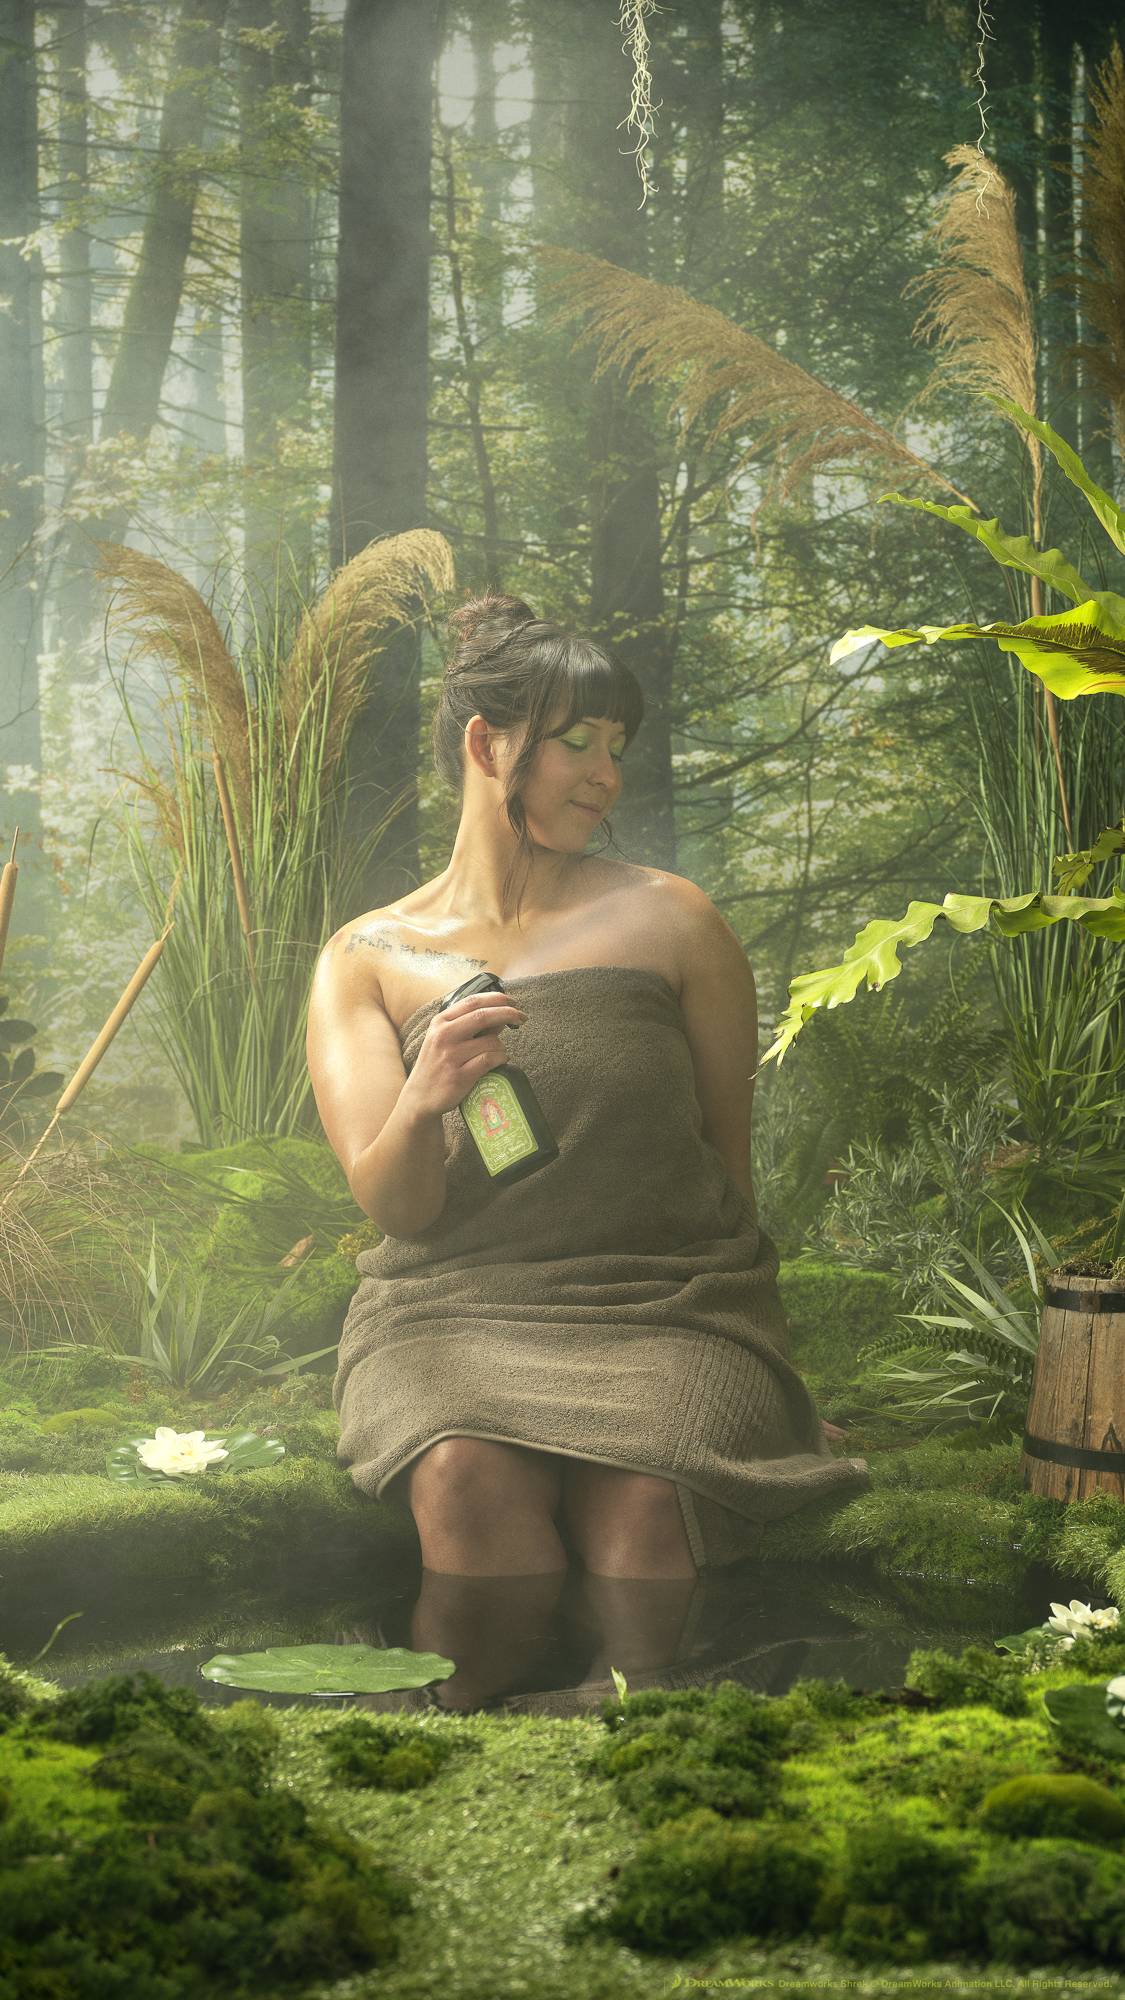 The model is sitting, wrapped in a fluffy brown towel, by the edge of the pond with their legs dipped in. They are surrounded by moss and shrubbery as they use the body spray. 